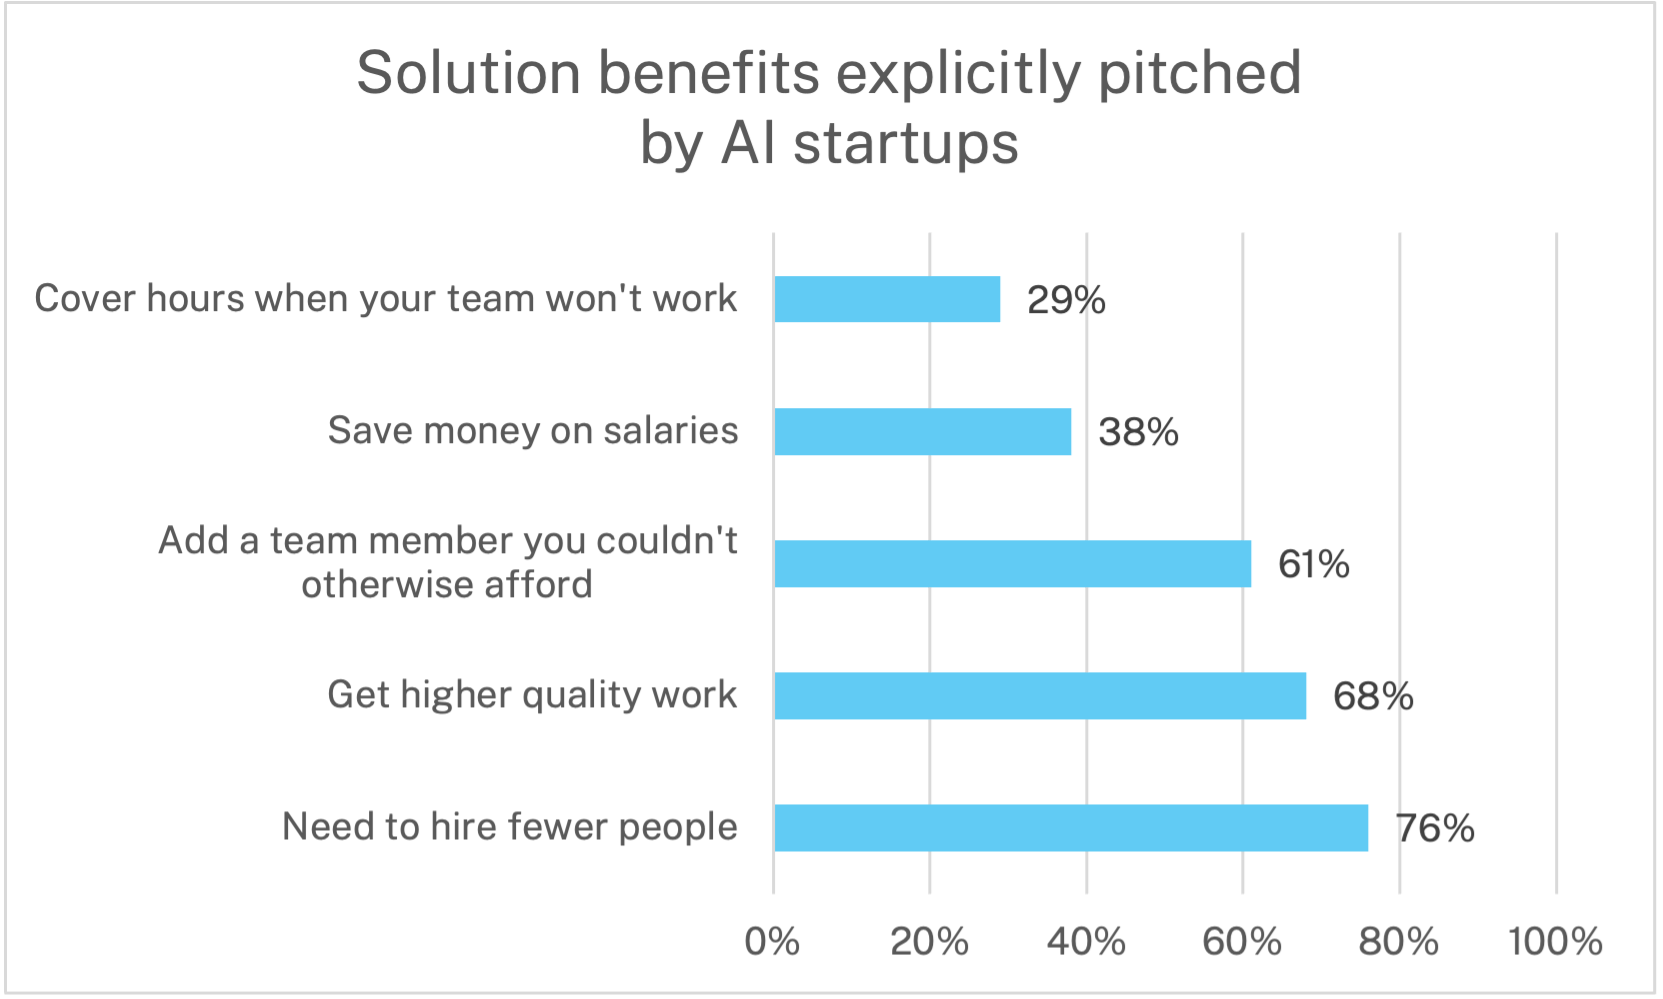 Bar chart showing what % of startups are pitching the following solution benefits:Need to hire fewer people	76% Get higher quality work	68% Add a team member you couldn't otherwise afford	61% Save money on salaries	38% Cover hours when your team won't work	29%